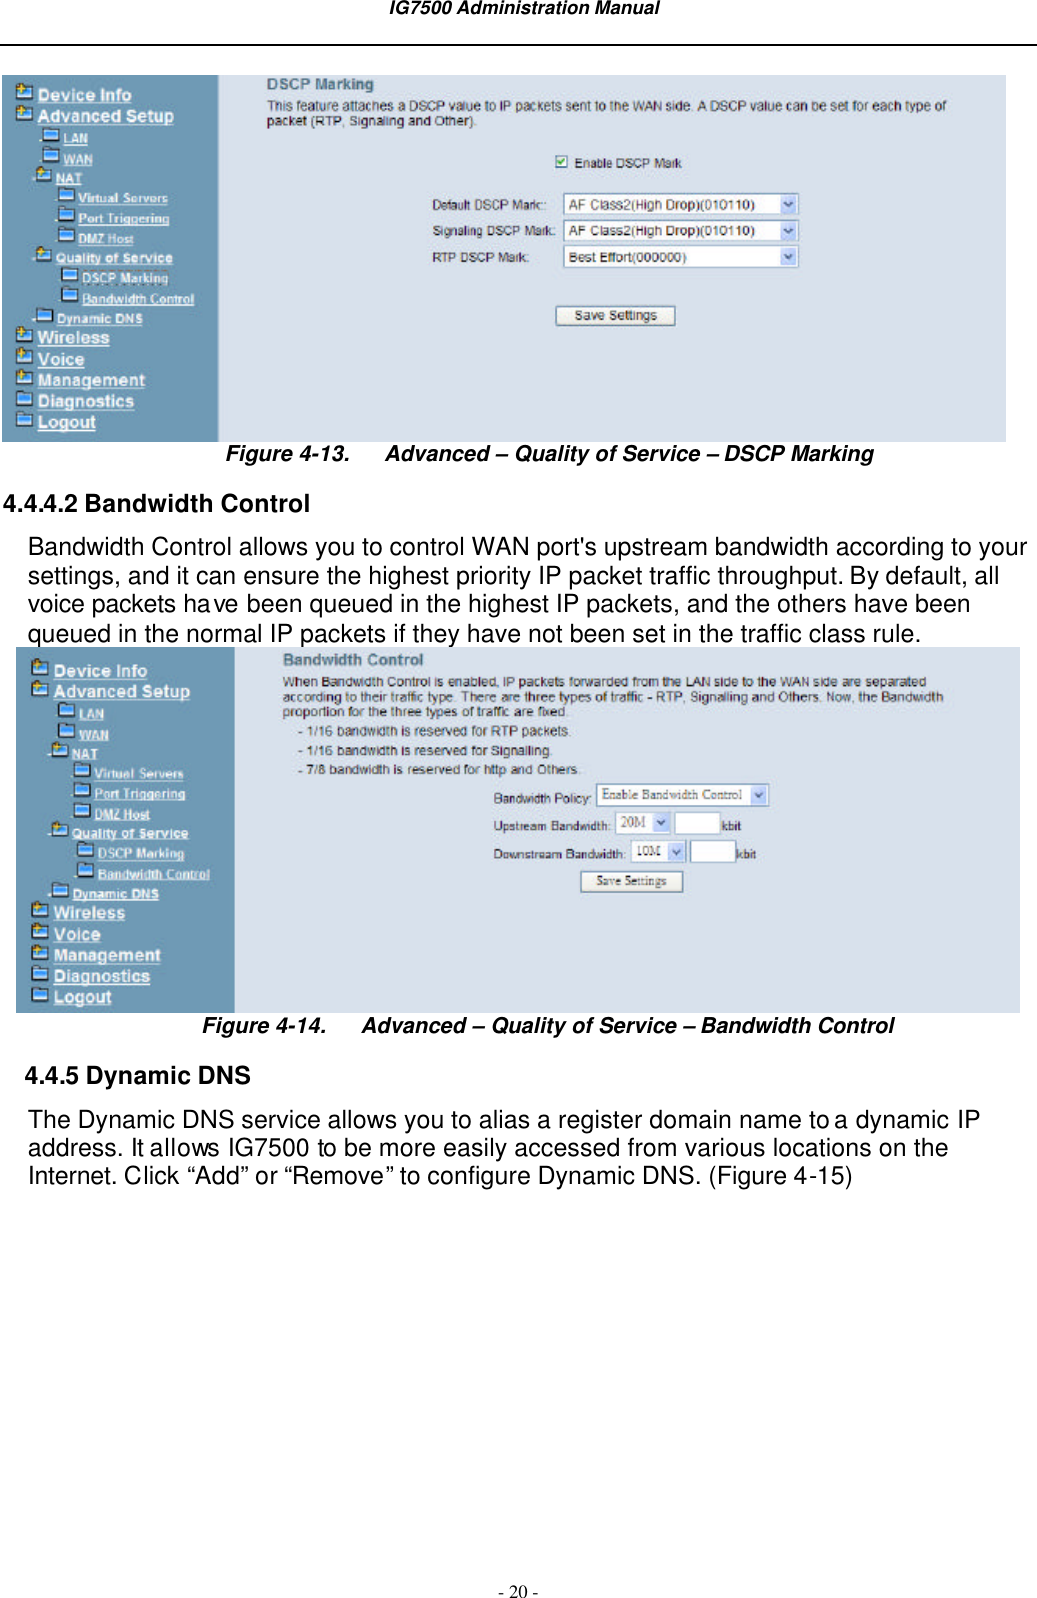  IG7500 Administration Manual  - 20 -  Figure 4-13. Advanced – Quality of Service – DSCP Marking 4.4.4.2 Bandwidth Control Bandwidth Control allows you to control WAN port&apos;s upstream bandwidth according to your settings, and it can ensure the highest priority IP packet traffic throughput. By default, all voice packets have been queued in the highest IP packets, and the others have been queued in the normal IP packets if they have not been set in the traffic class rule.  Figure 4-14. Advanced – Quality of Service – Bandwidth Control 4.4.5 Dynamic DNS The Dynamic DNS service allows you to alias a register domain name to a dynamic IP address. It allows IG7500 to be more easily accessed from various locations on the Internet. Click “Add” or “Remove” to configure Dynamic DNS. (Figure 4-15) 